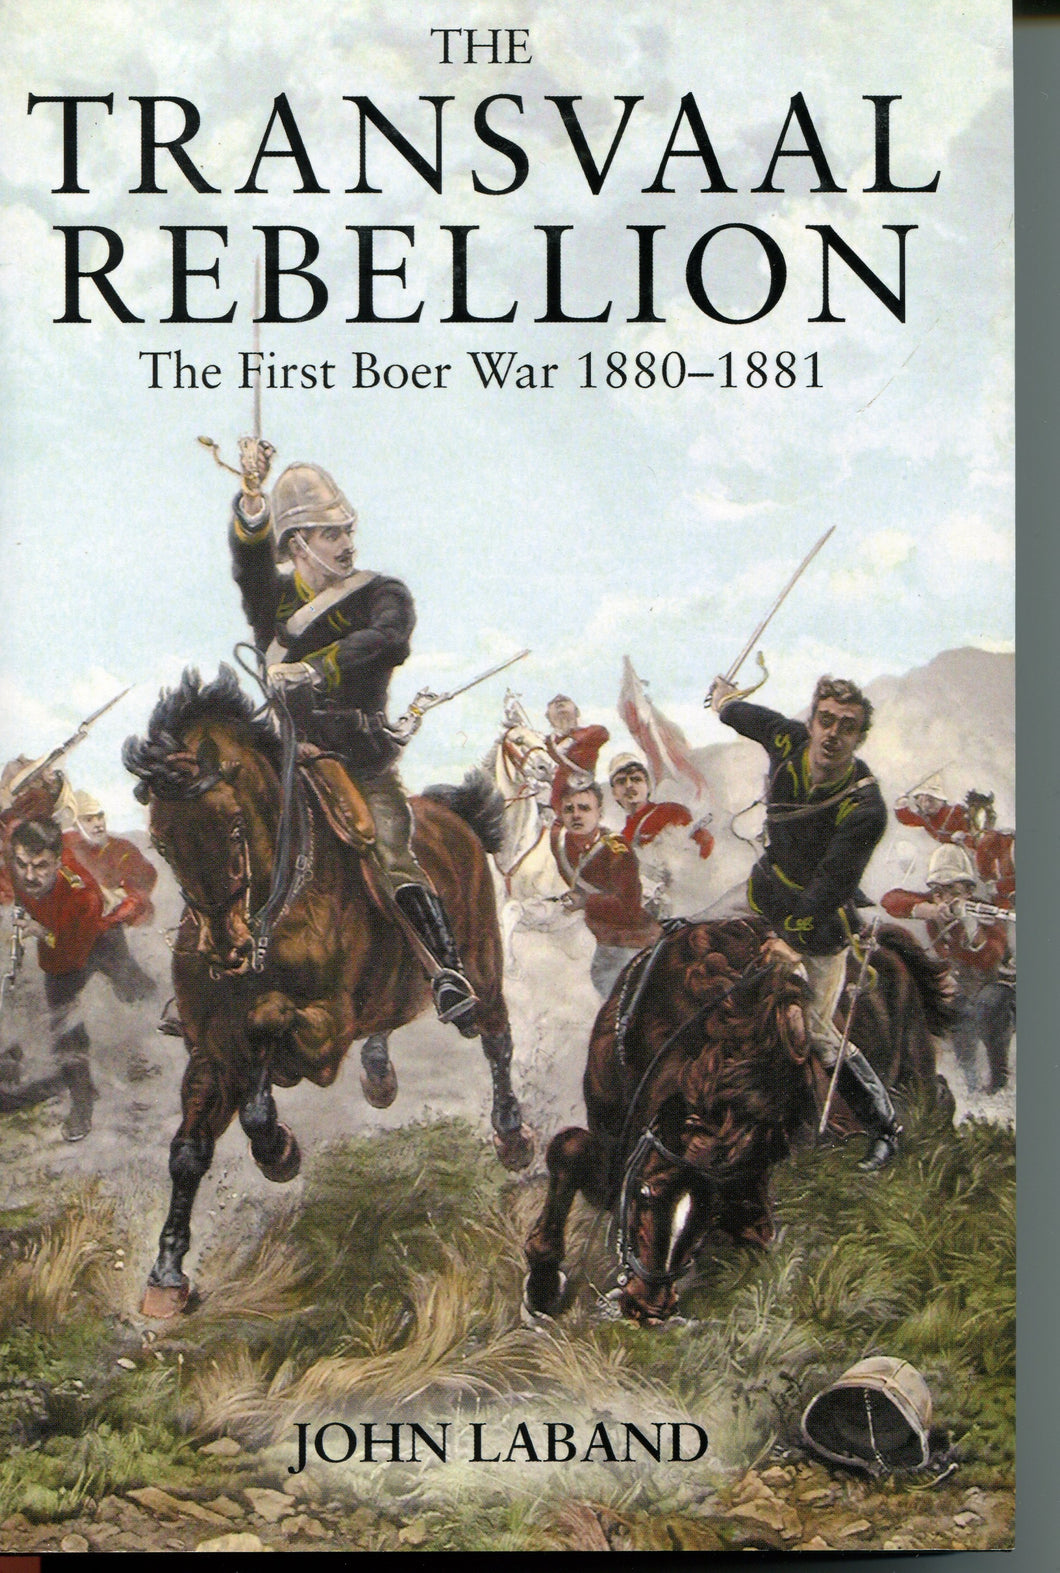 ‘The Transvaal Rebellion; The First Boer War 1880-1881’ By John Laband